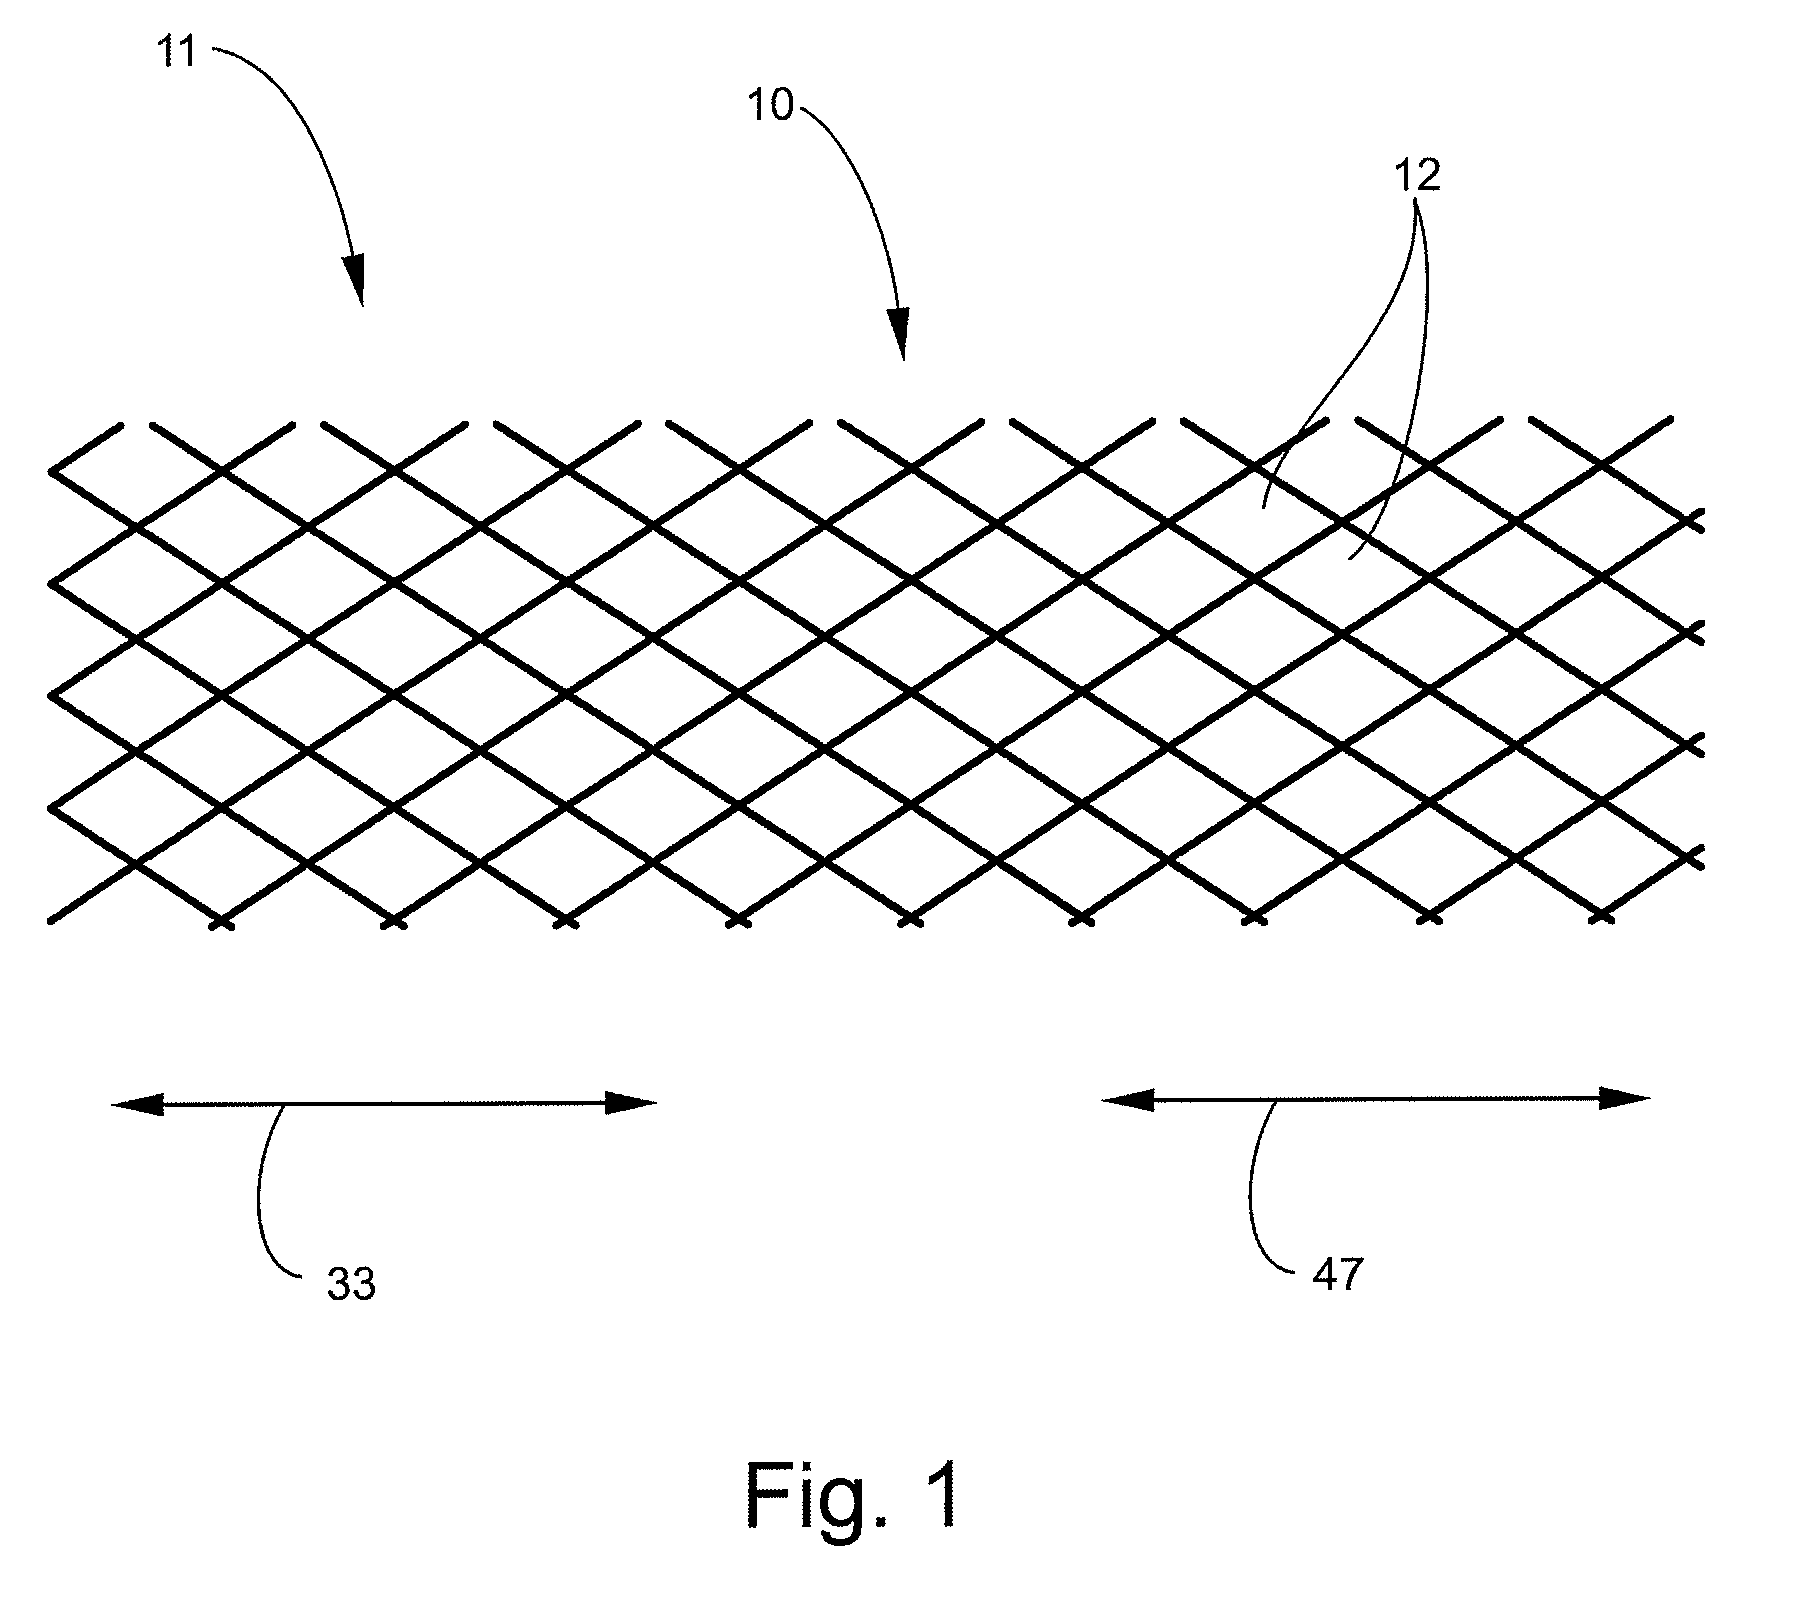 Elongation resistant fabric and devices